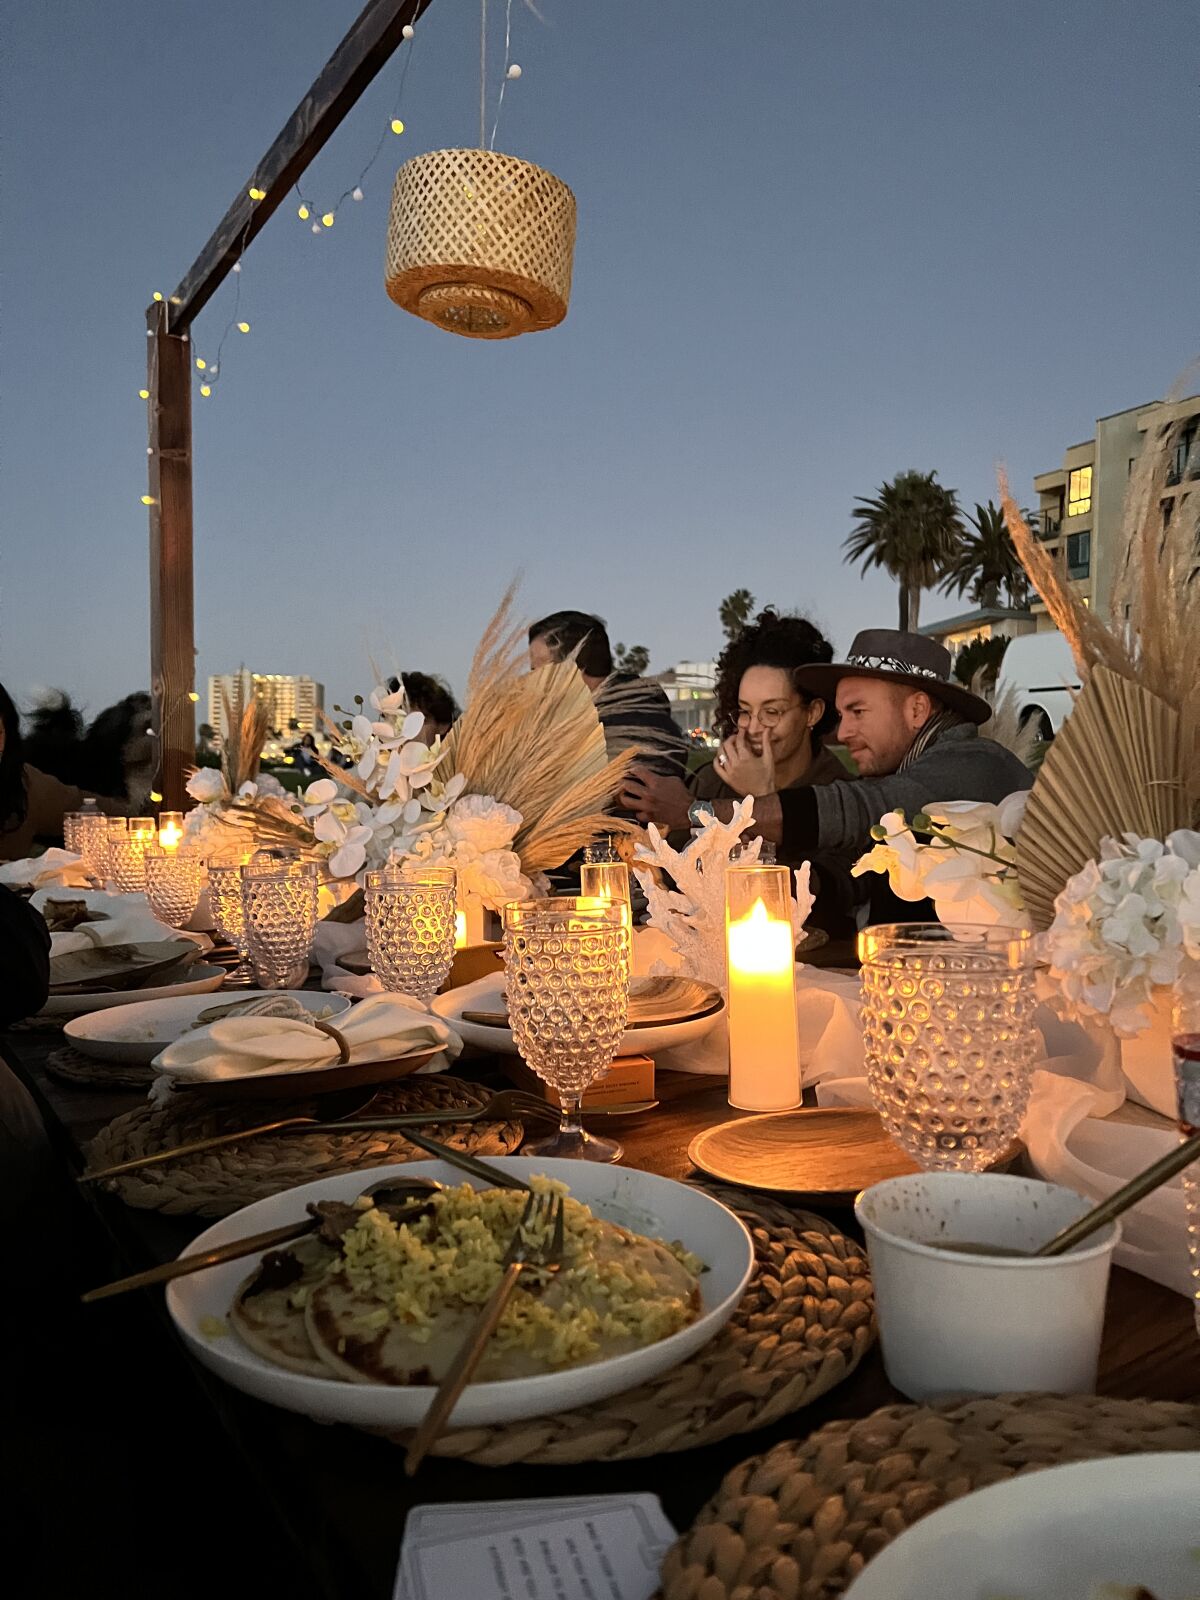 Guests lingered over food and conversation long past sunset.